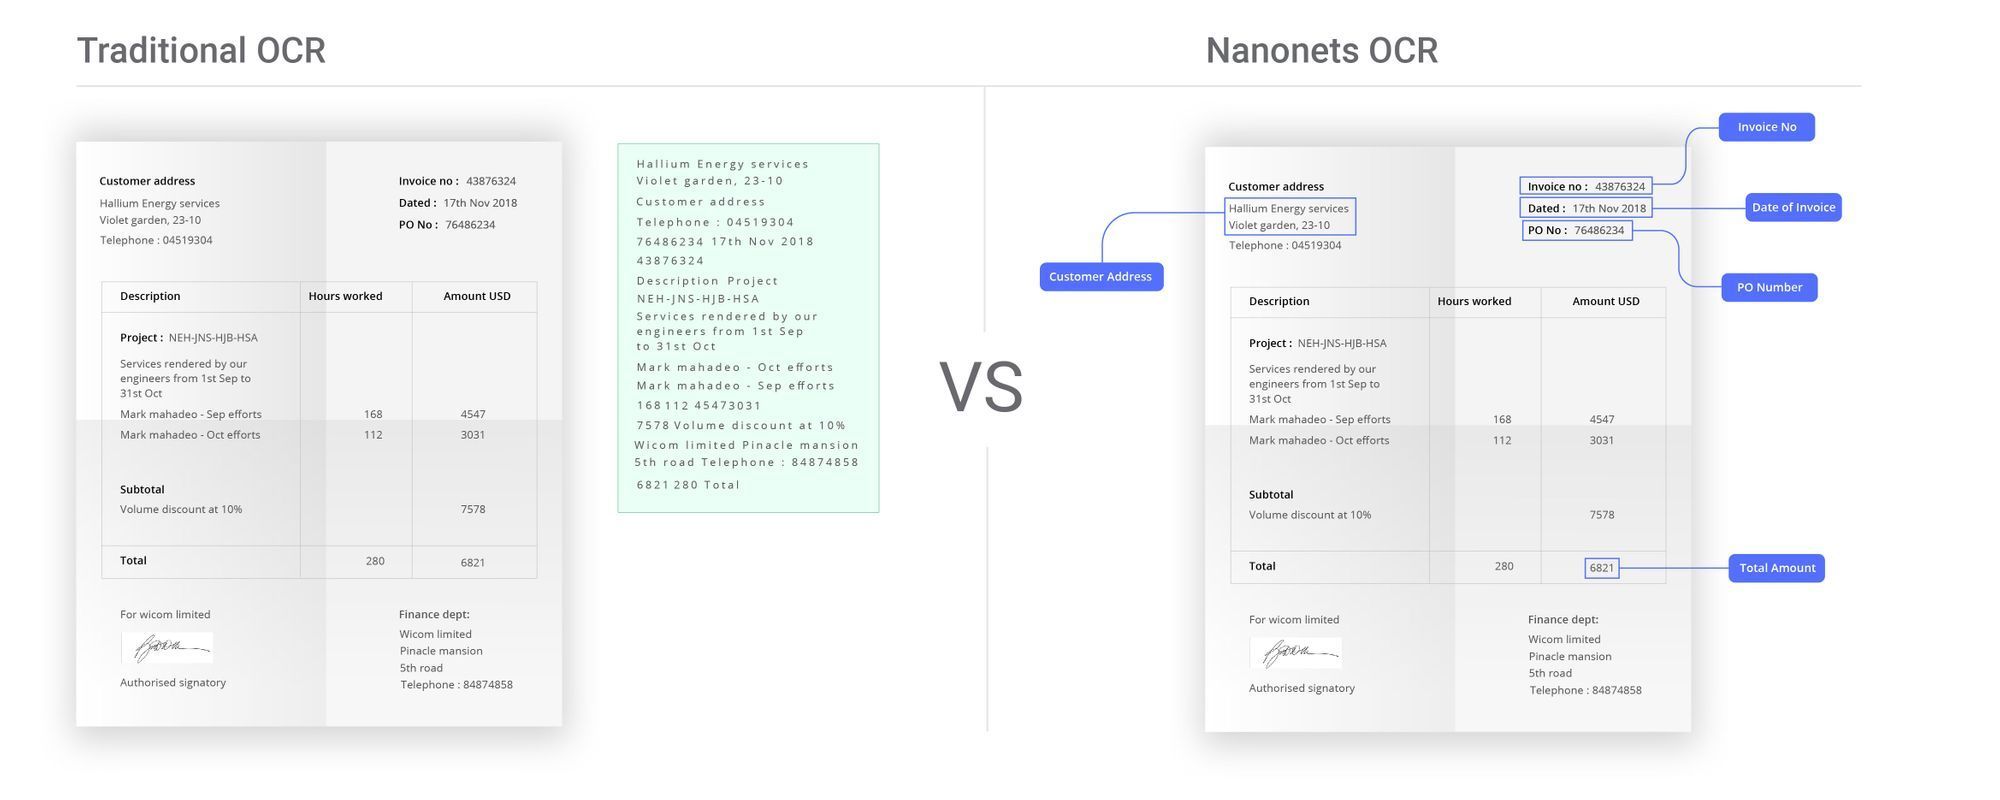 Picture illustrating the advantages of Nanonets OCR for order entry automation compared to traditional OCR tools